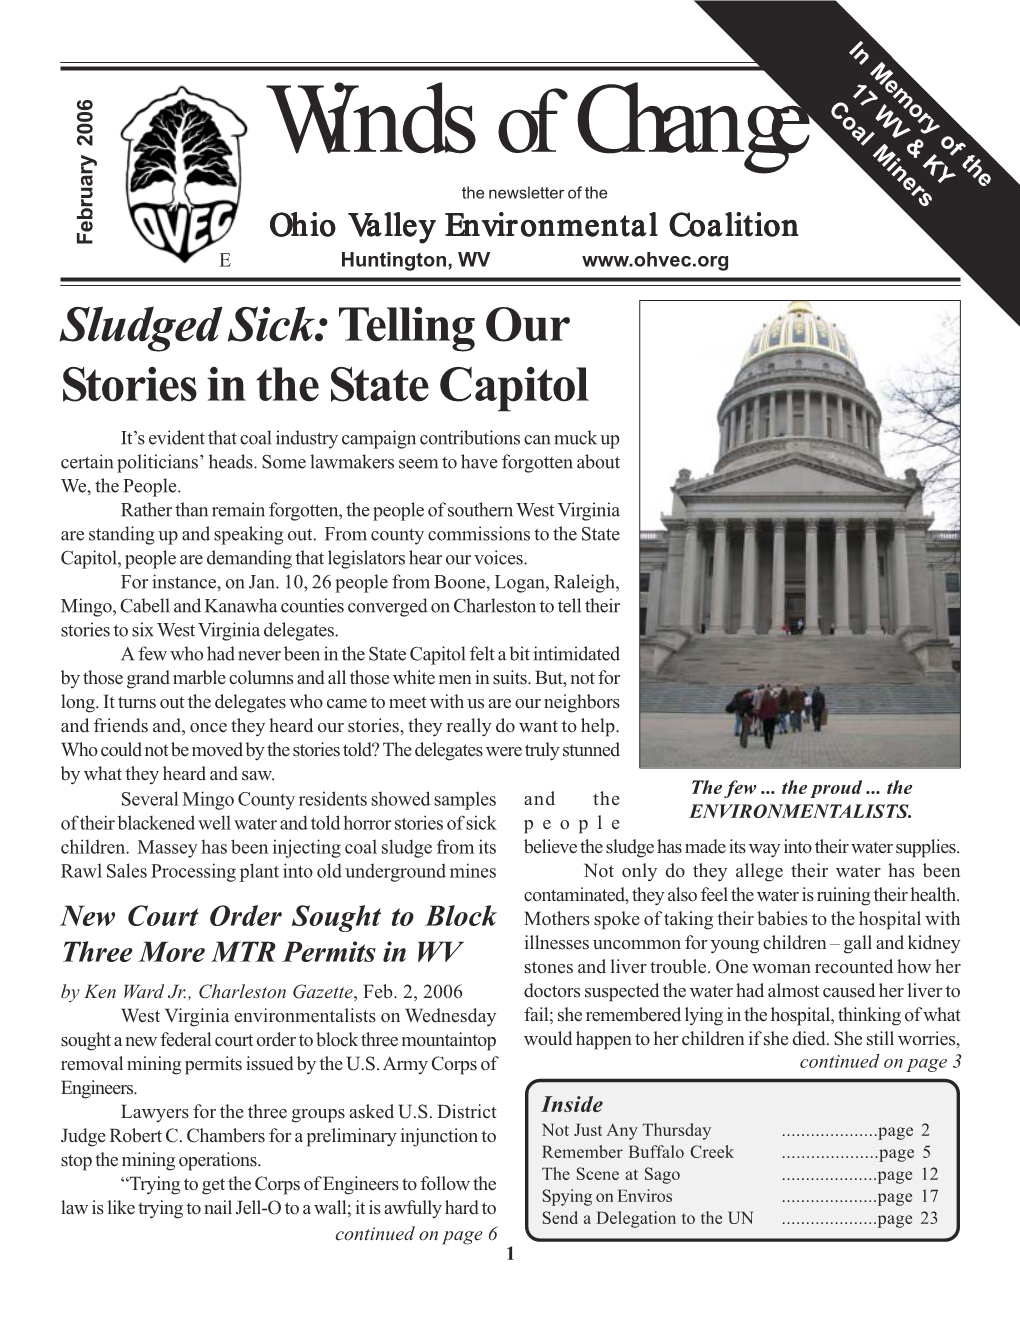 Sludged Sick:Telling Our Stories in the State Capitol